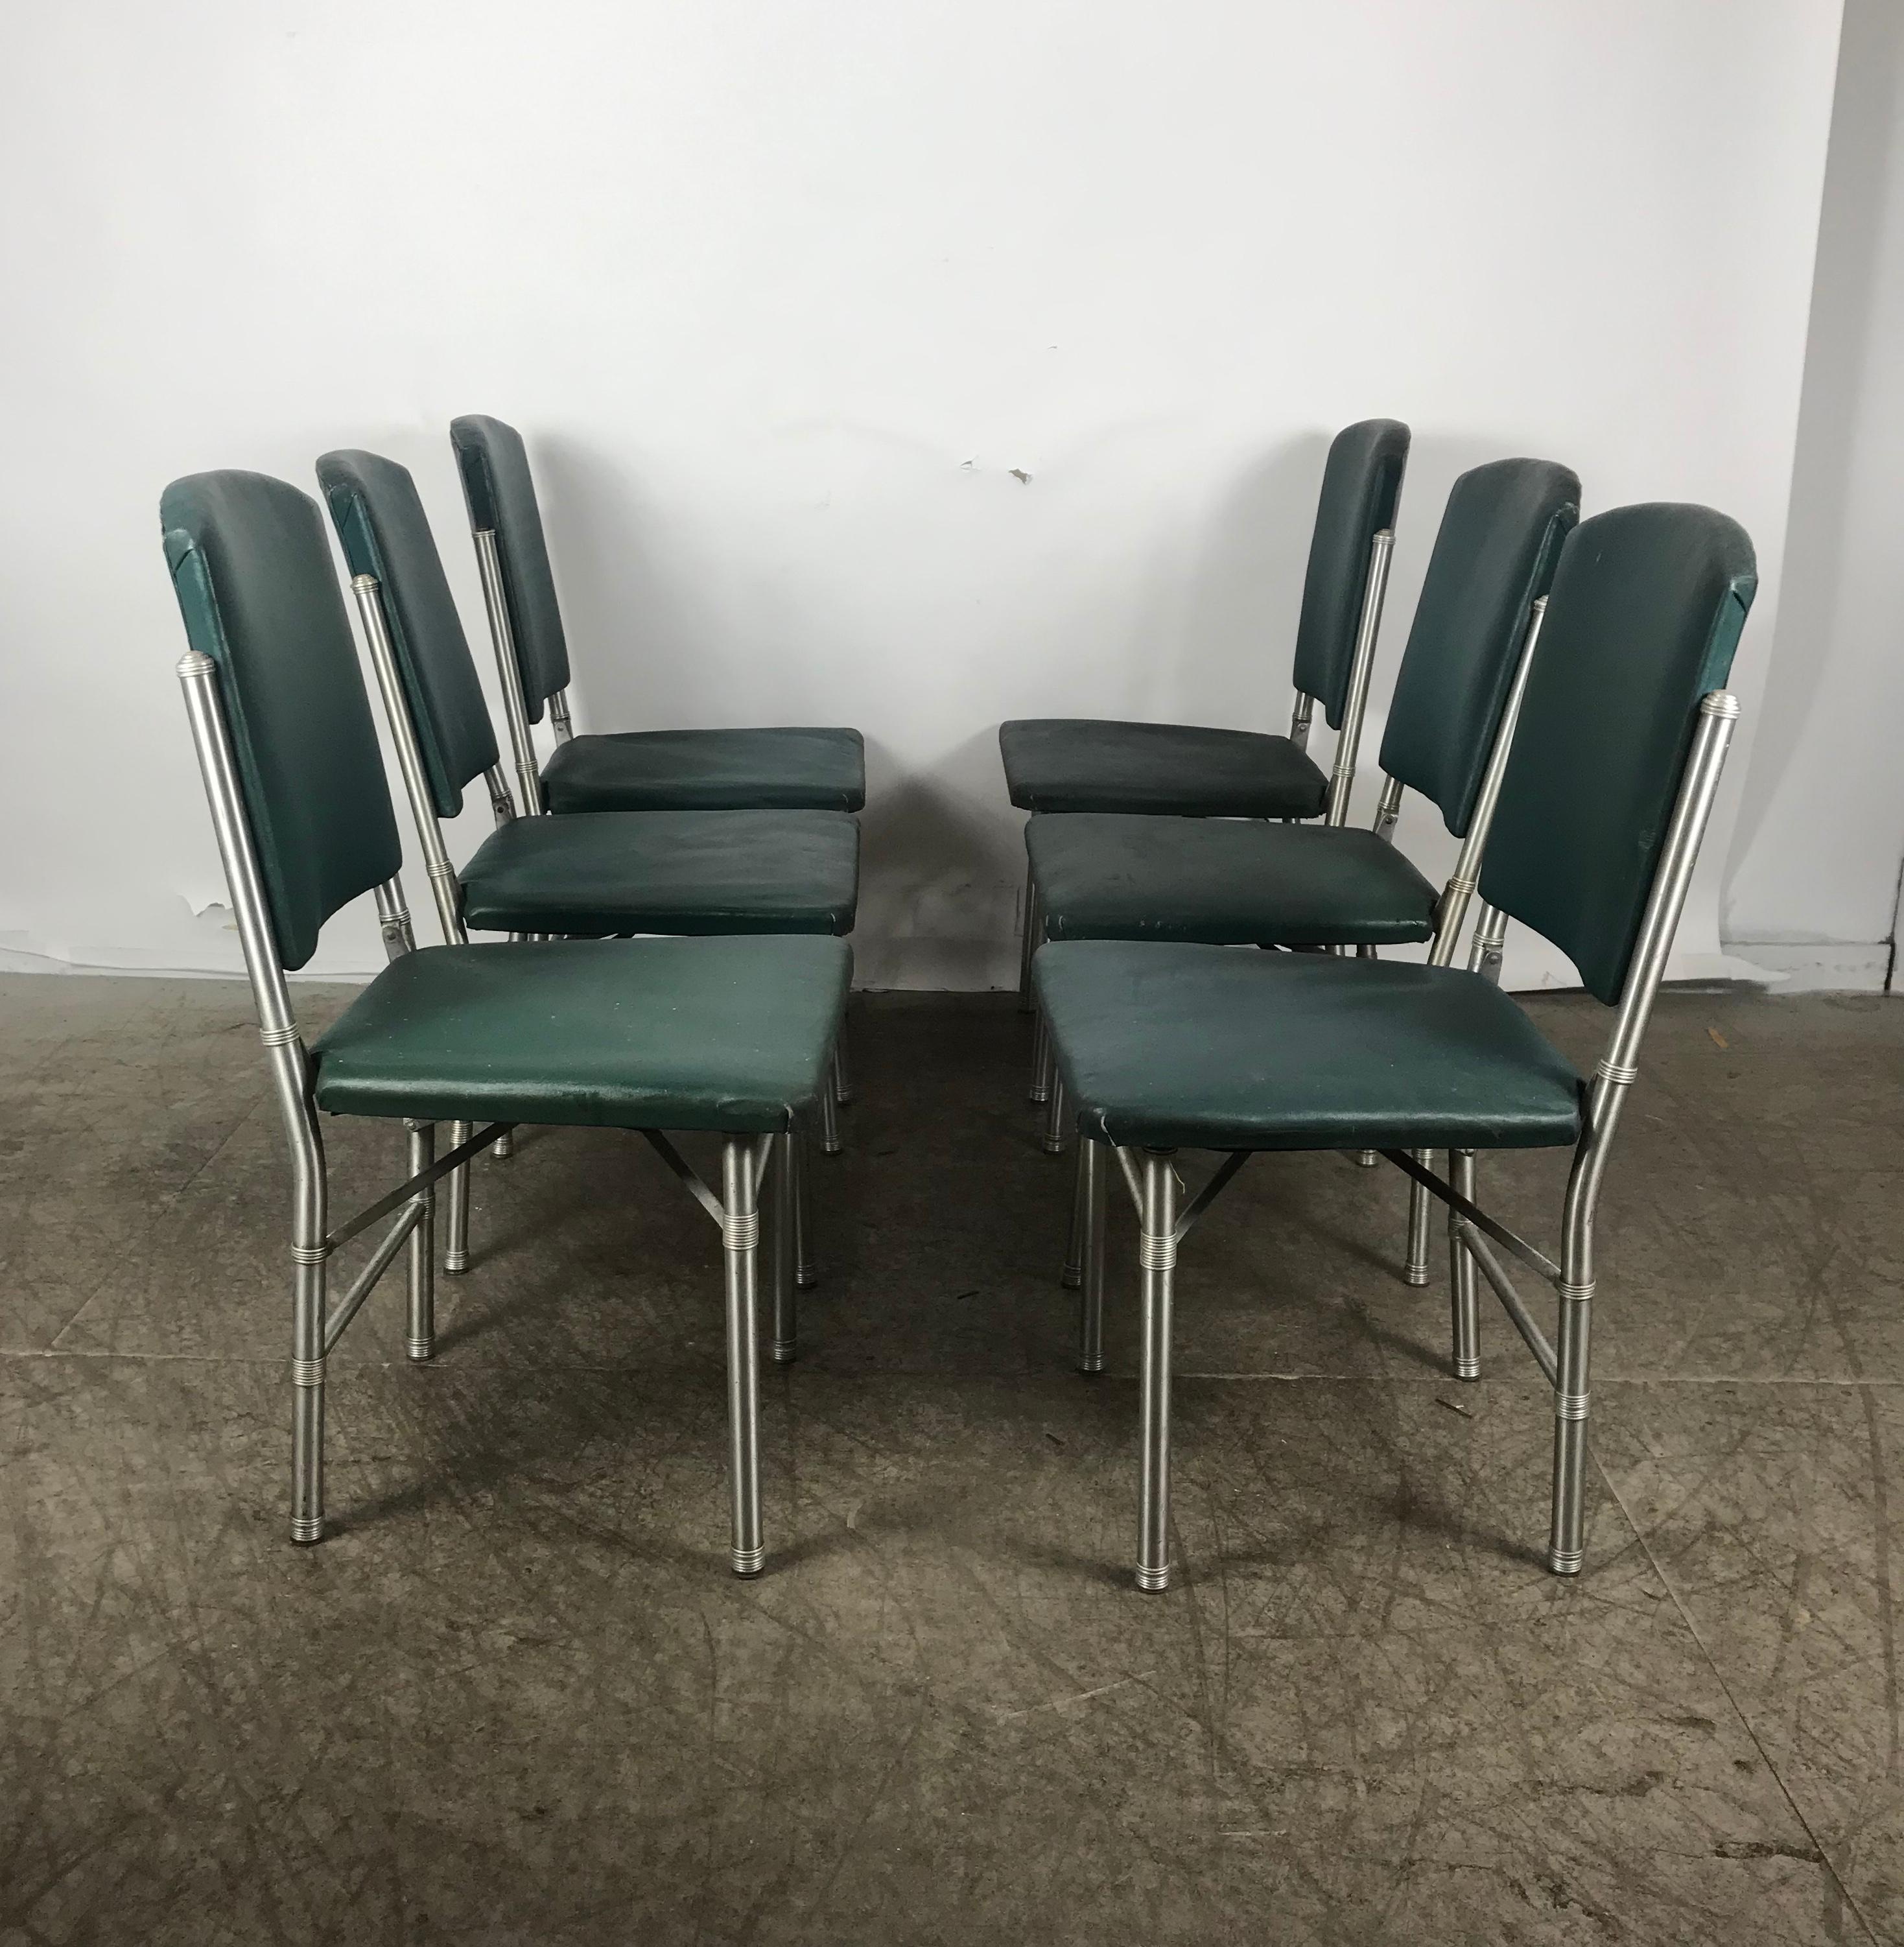 Classic set of 6 side Art Deco, Machine Age dining chairs designed by Warren McArthur.. Spun Aluminum and original oil cloth, fold for easy storage, retain original labels,.